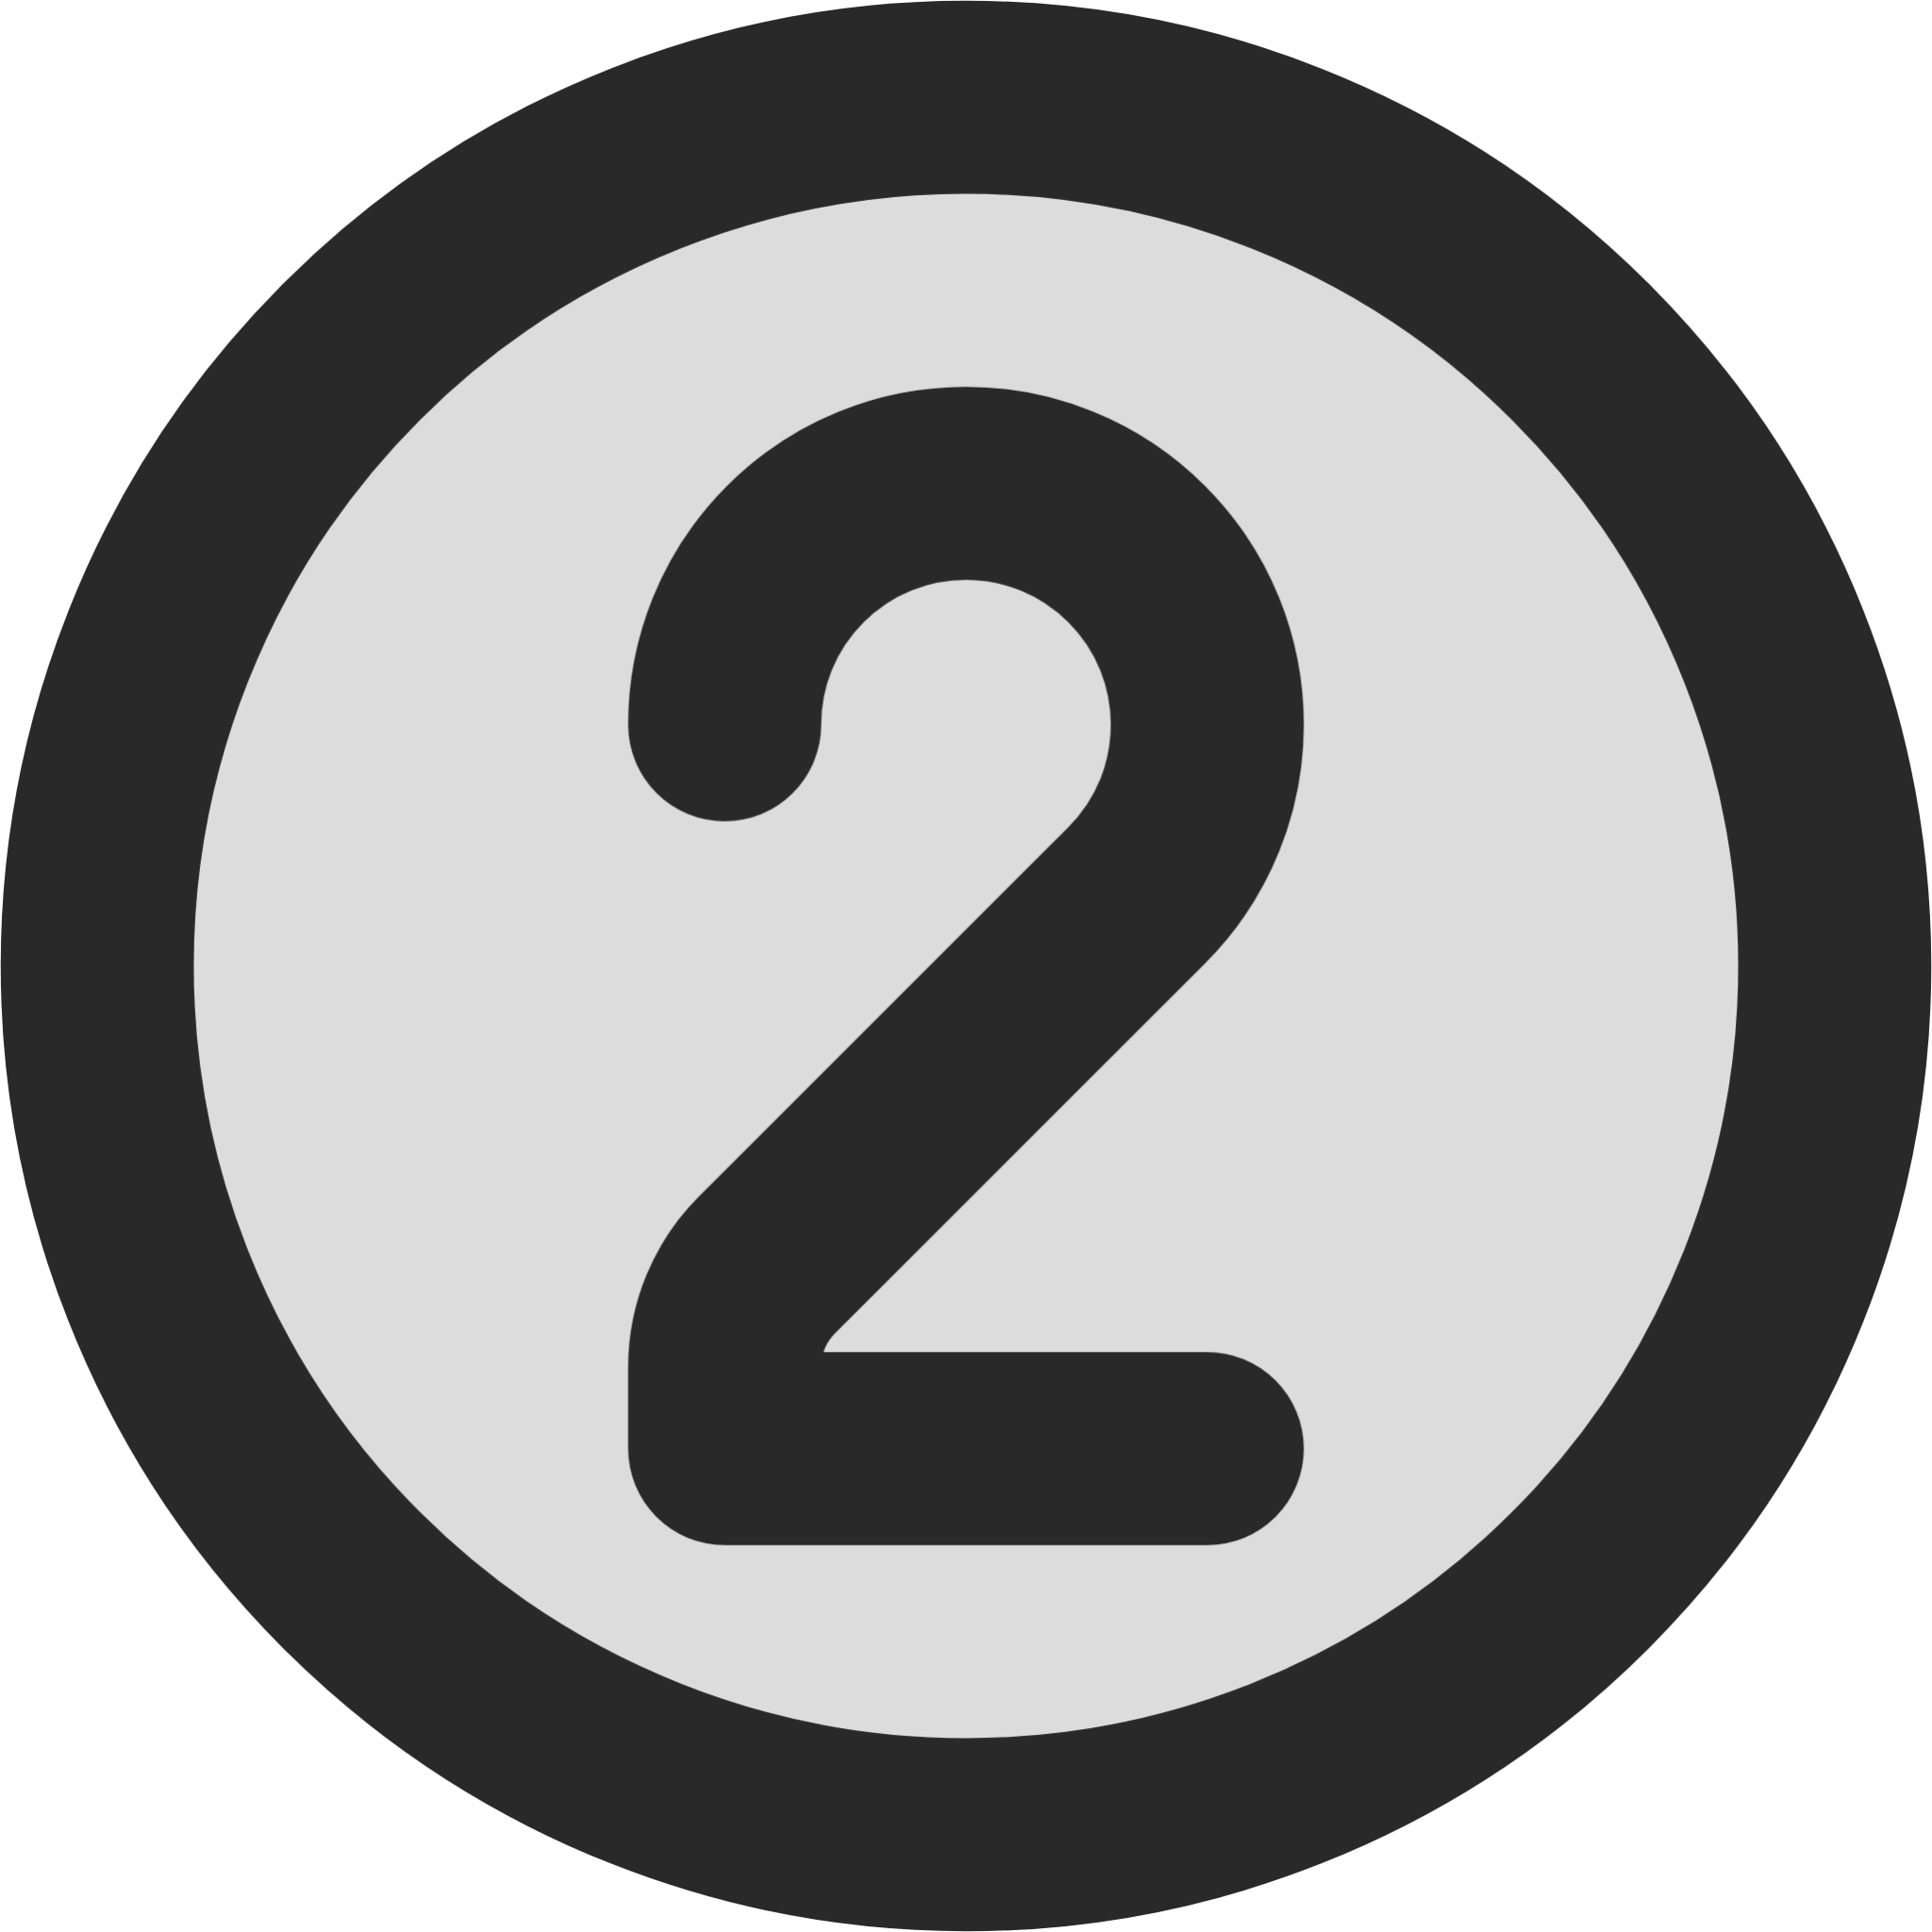 number 2 circle icon